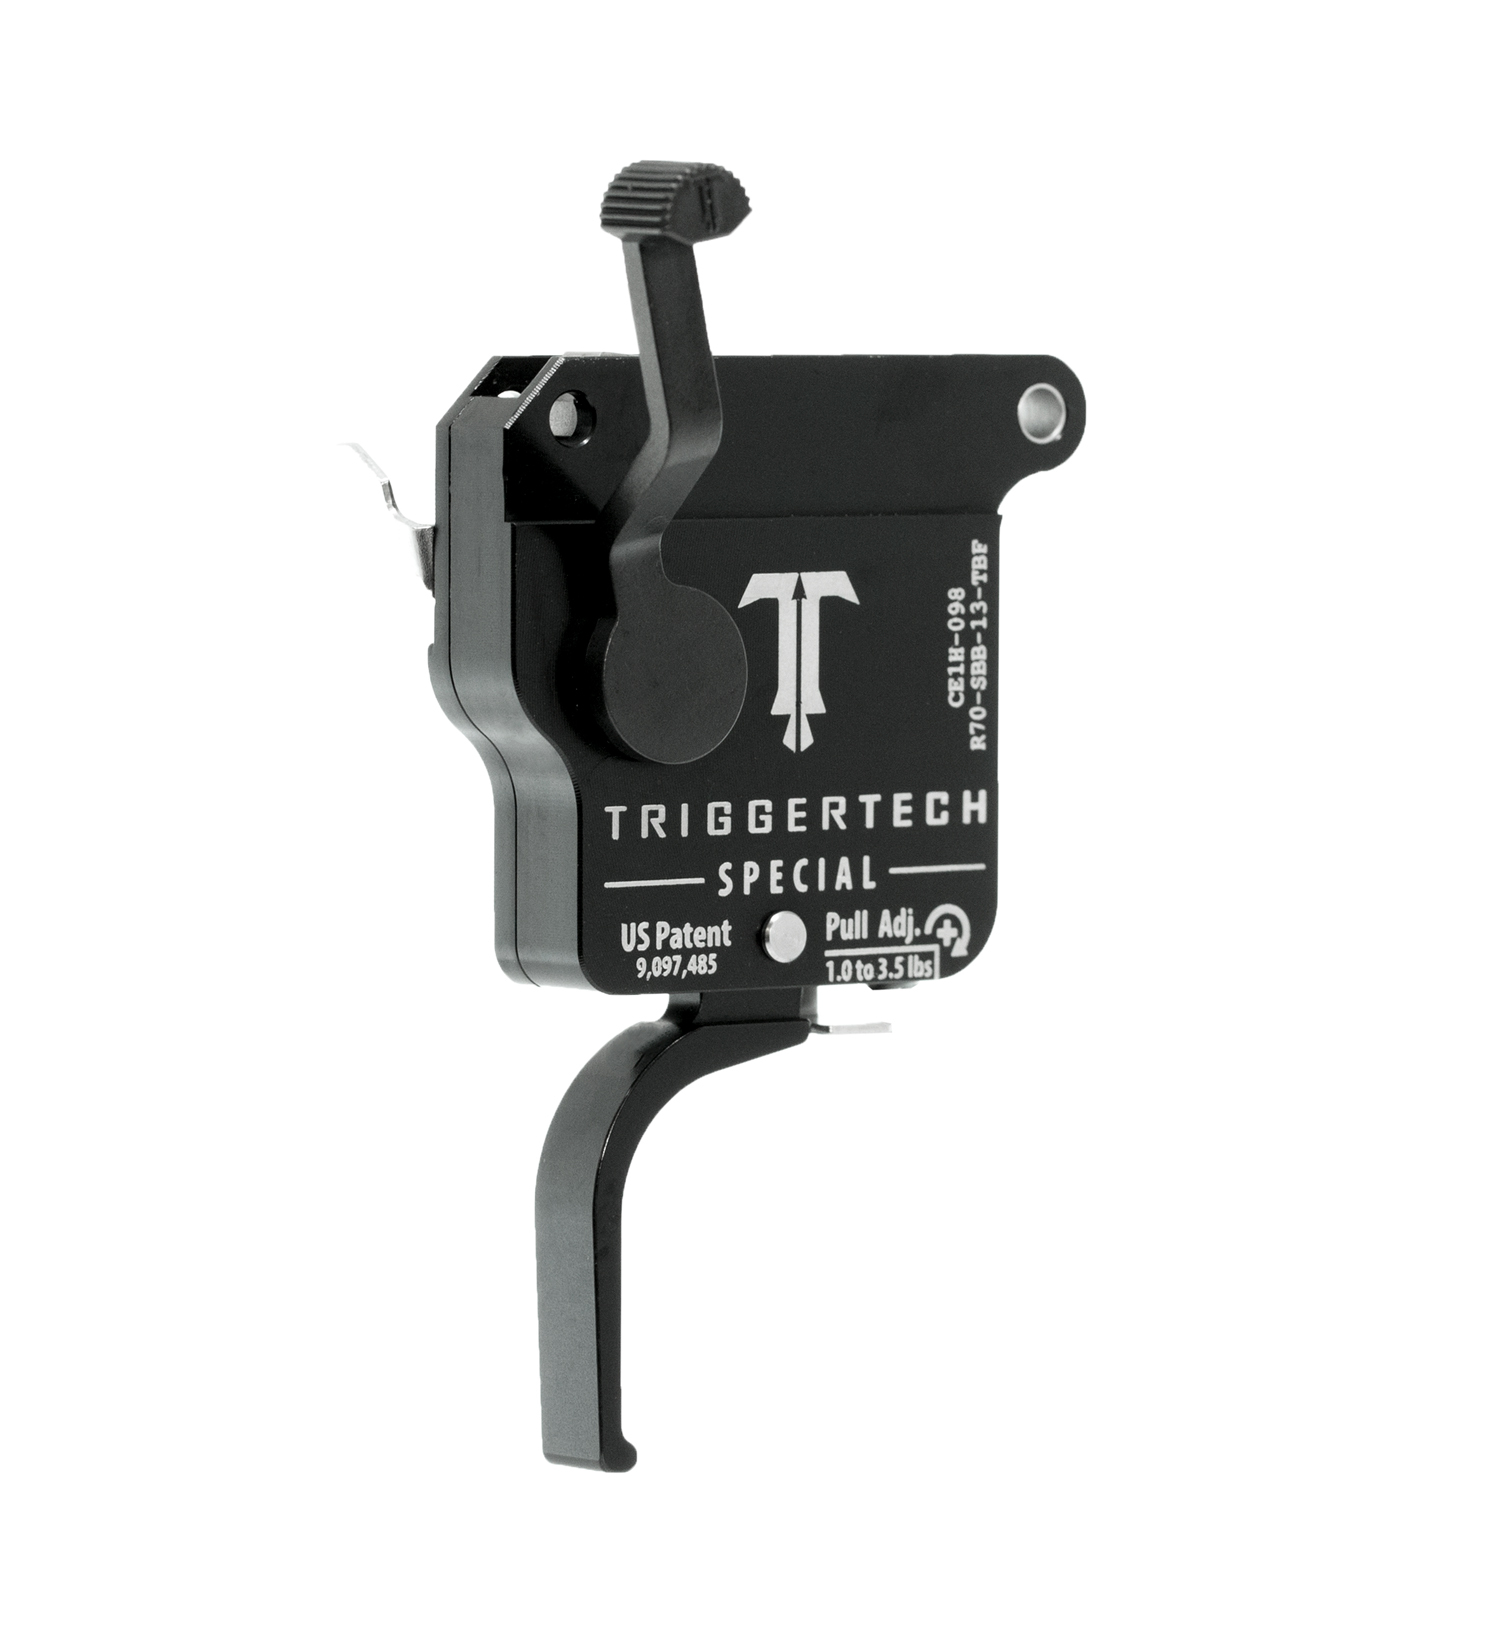 TriggerTech Special Flat PVD Trigger for Remington 700 actions and clones, ...